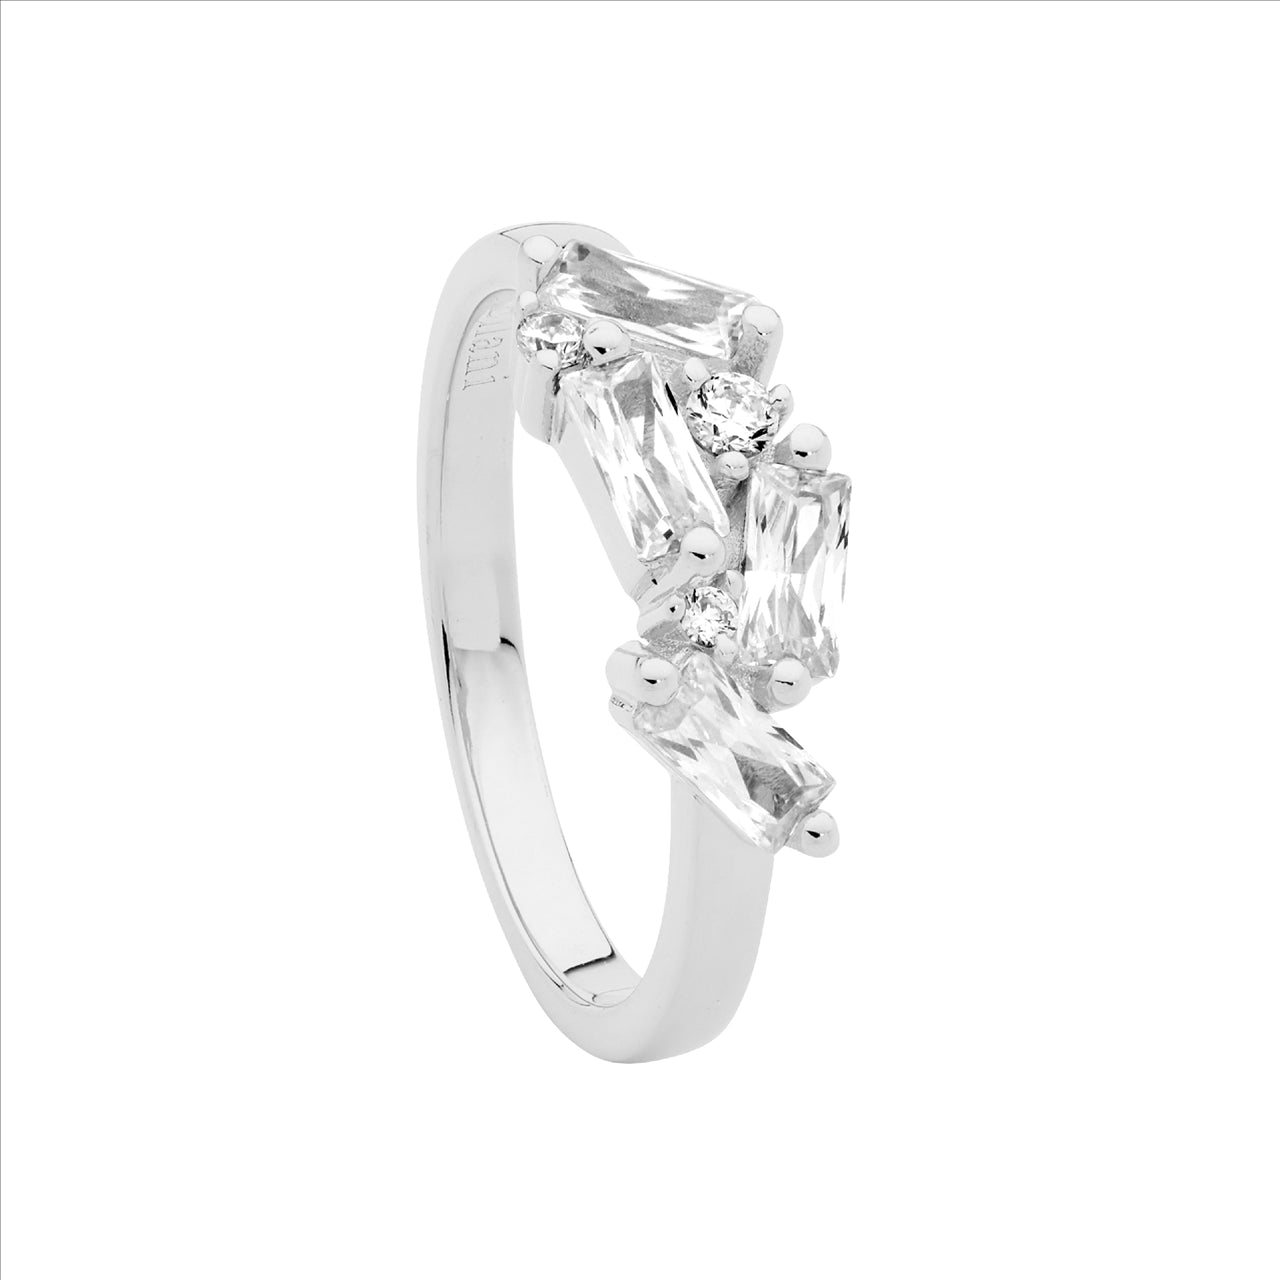 Staggered Cubic Zirconia Dress Ring - Sterling Silver.